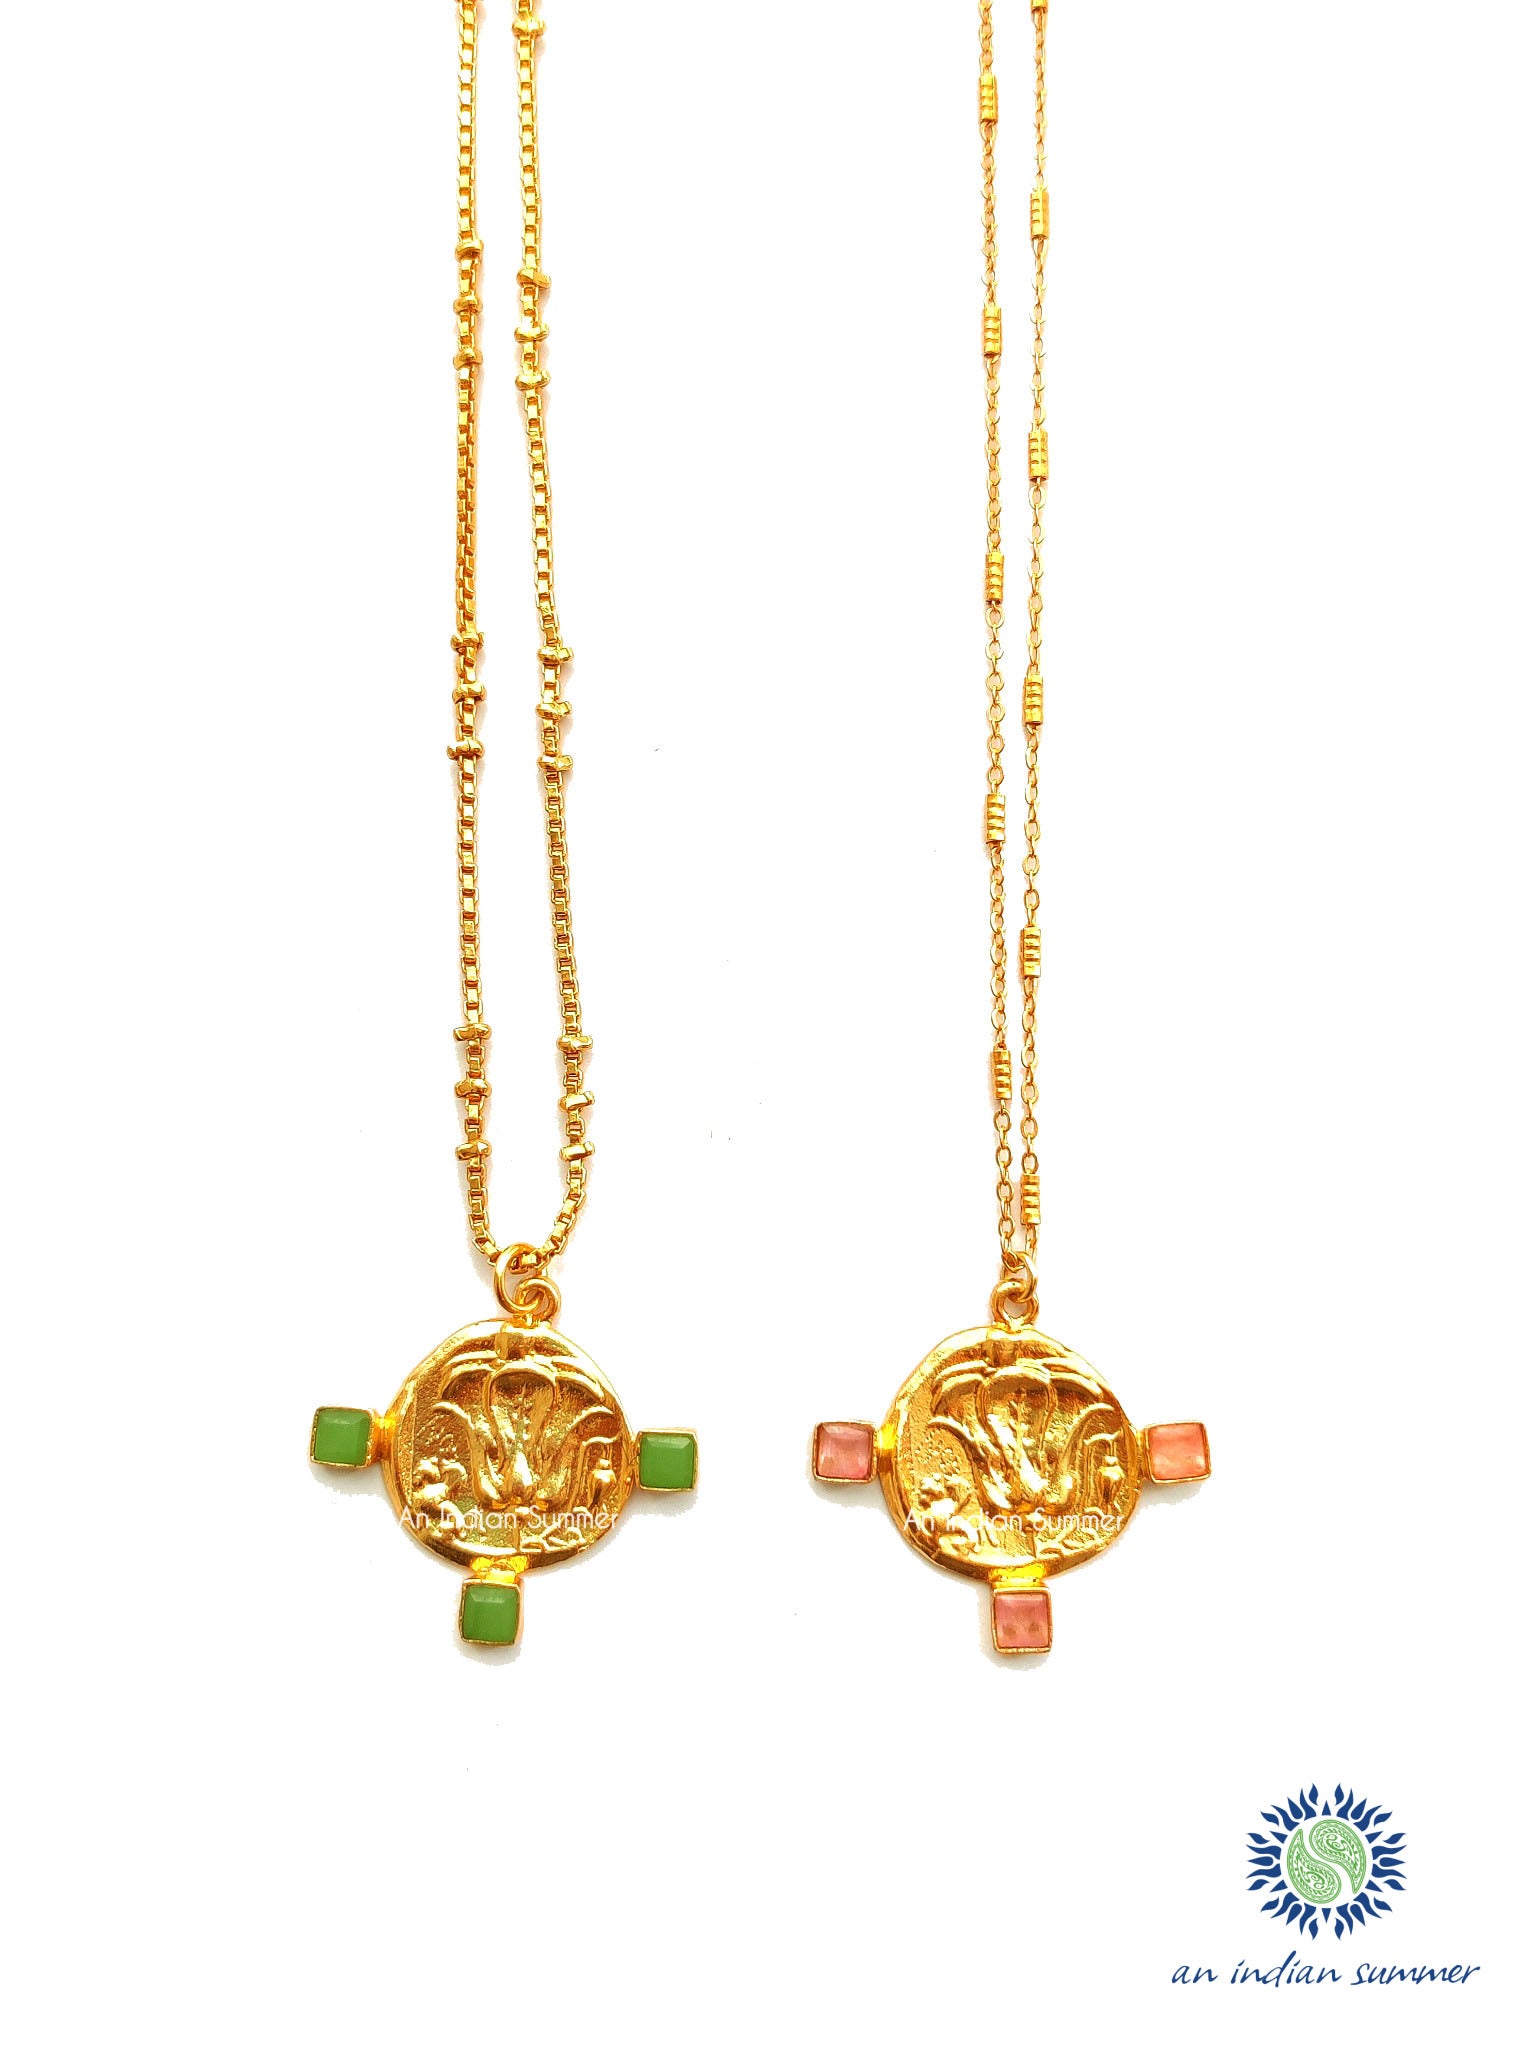 Talisman Medal Necklace - Lotus | Green Jade Pink Jade | 22 Carat Gold Plated Semi Precious Stones | An Indian Summer | Seasonless Timeless Sustainable Ethical Authentic Artisan Conscious Clothing Lifestyle Brand